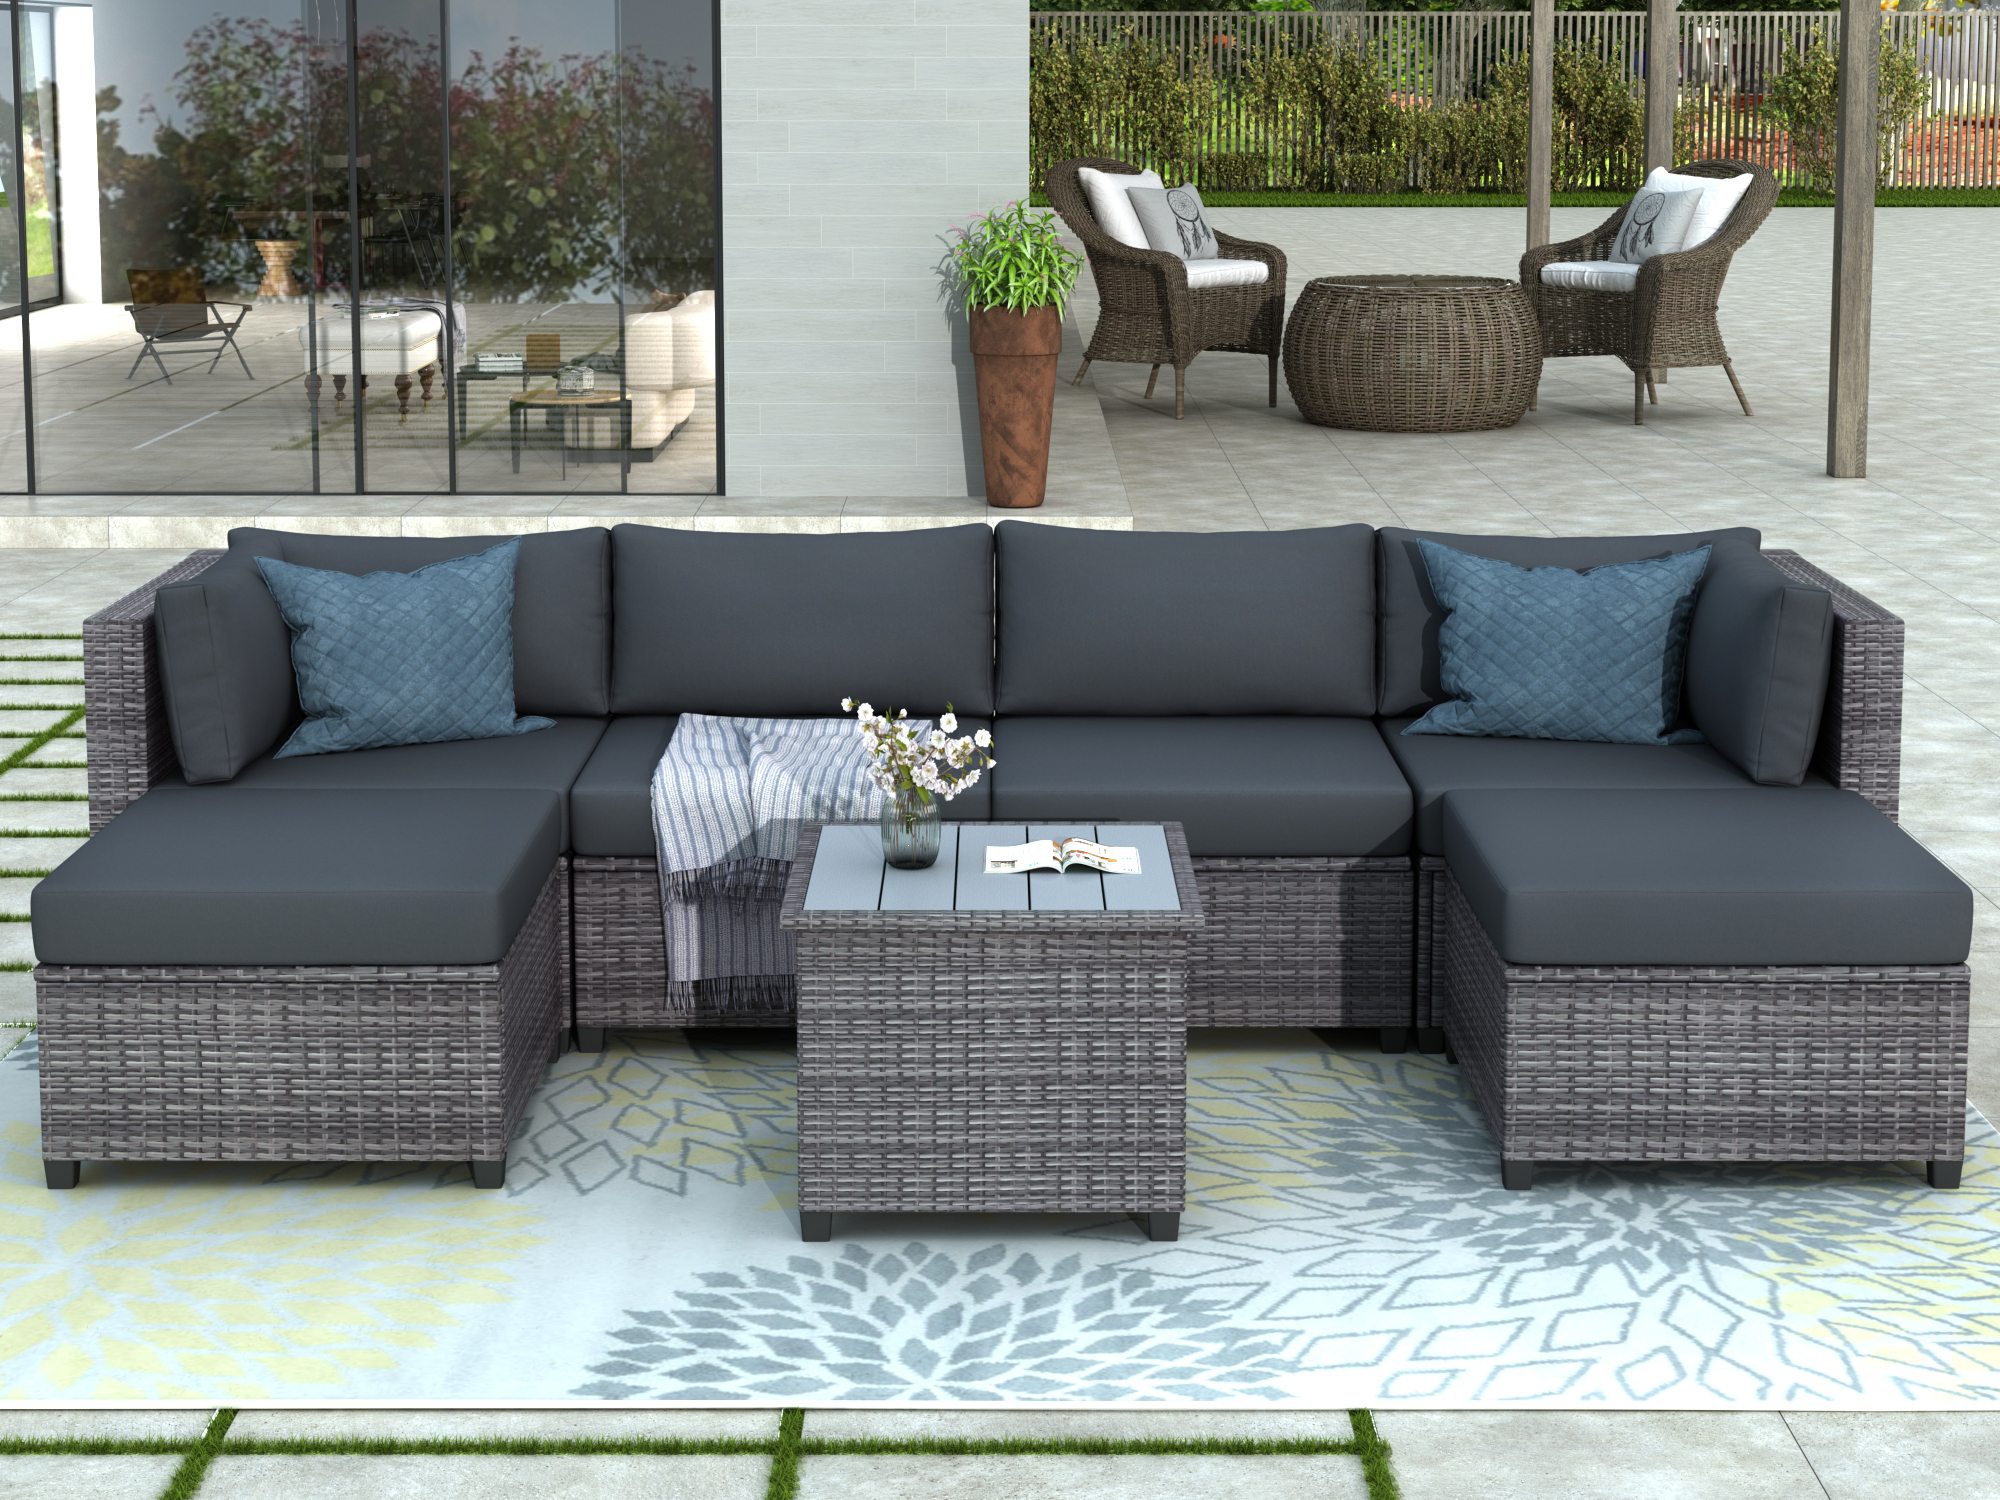 4 Pcs All-Weather Outdoor Checkered Wicker Rattan Conversation Sofa Set Glass Coffee Table with Removable Cushion. Black -5pcs Okeysen Patio Furniture Sets